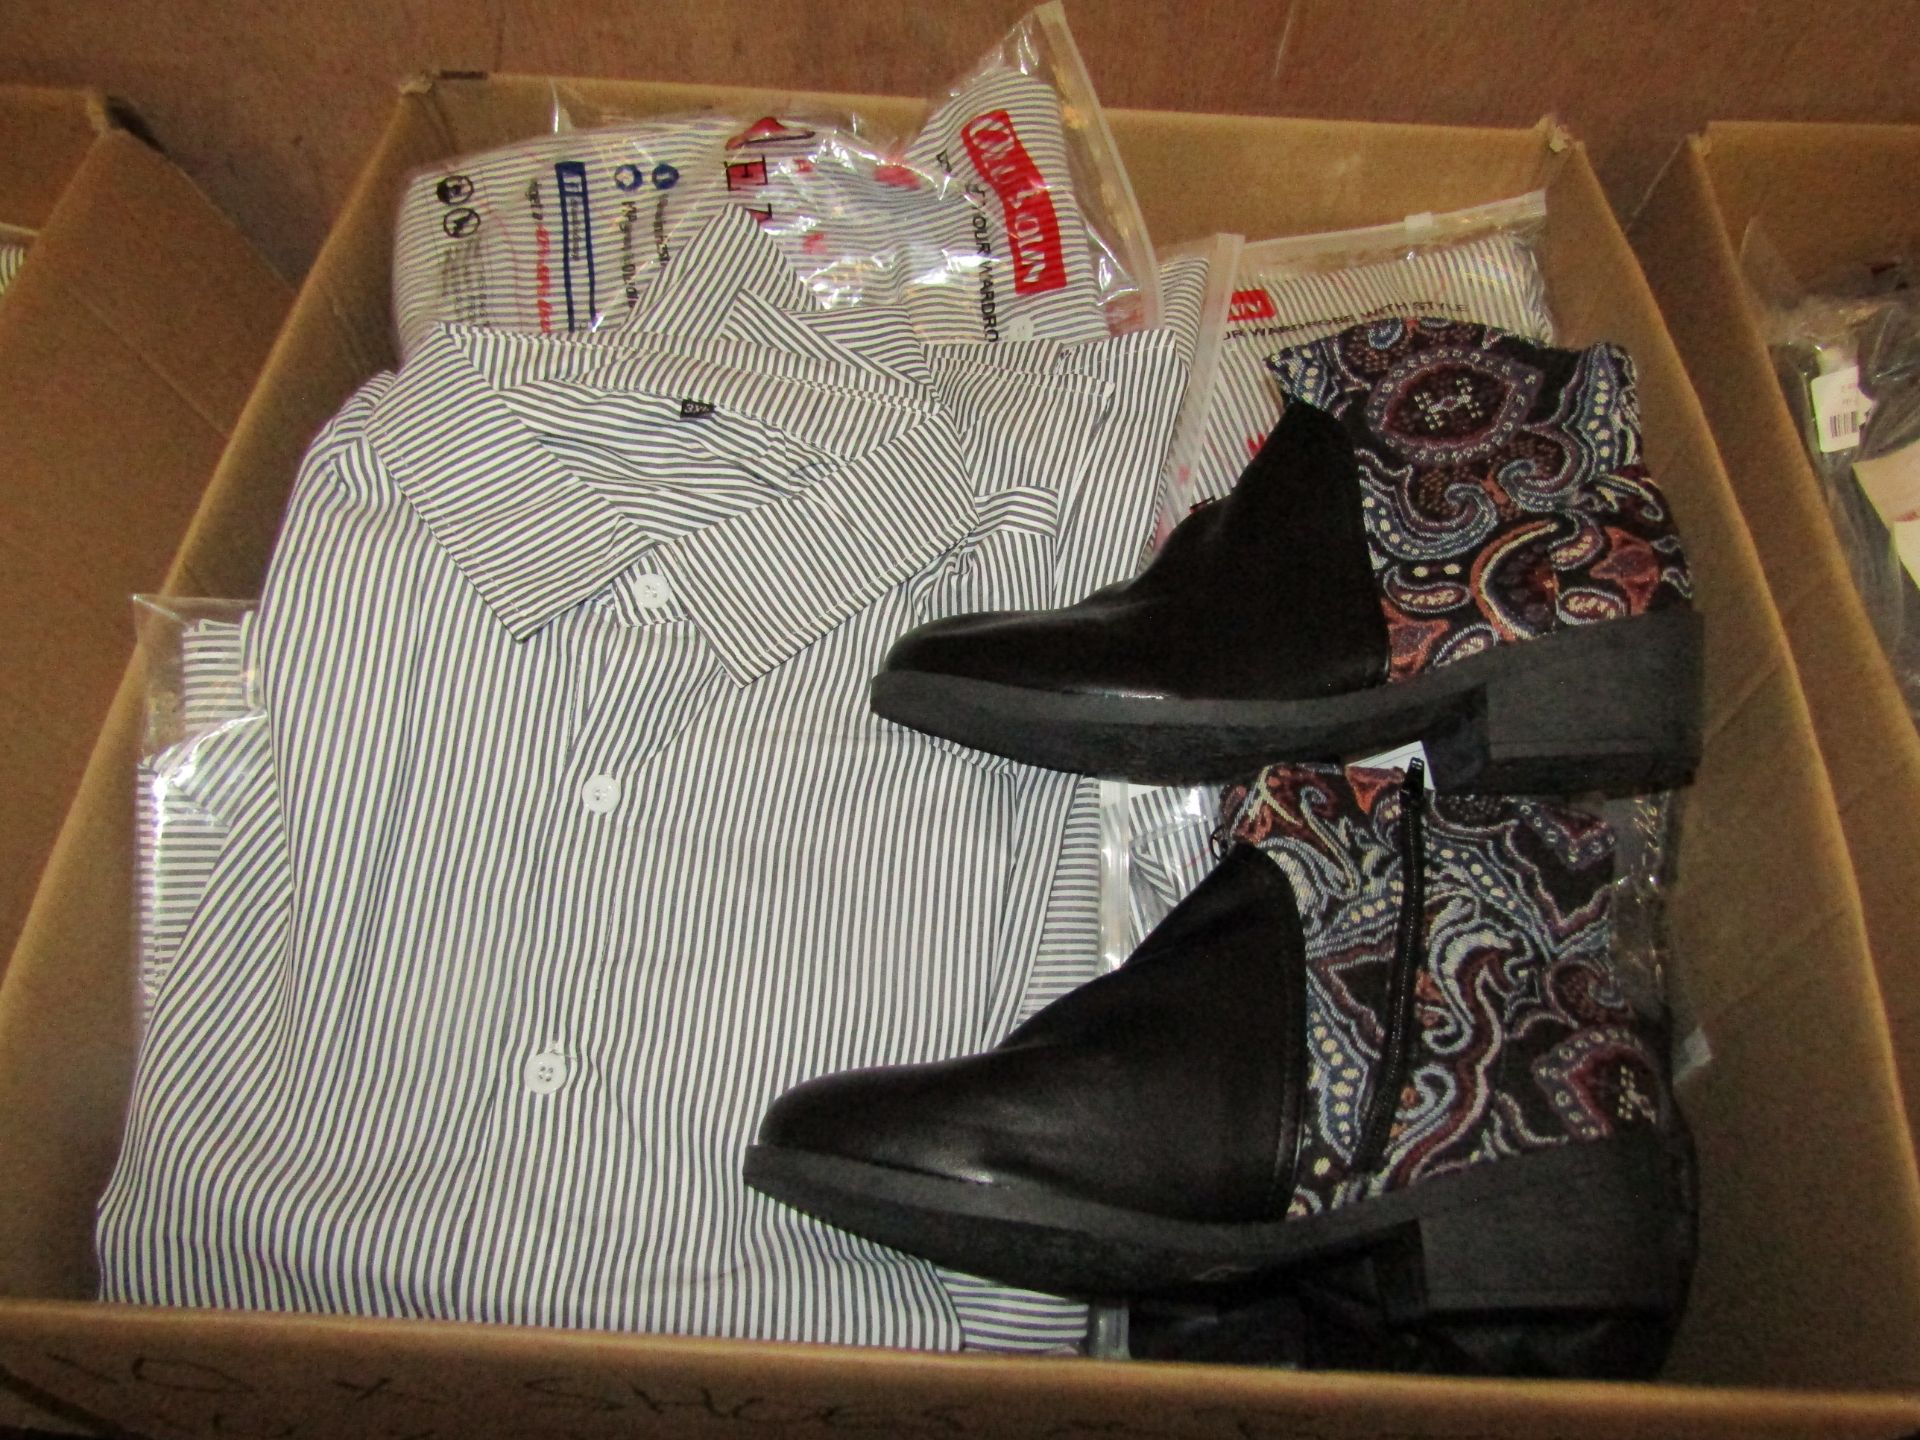 box of Mixed Amazon Shoes and and Clothing all new, consists of 10 shoes/boots and 20 pieces of - Image 2 of 2